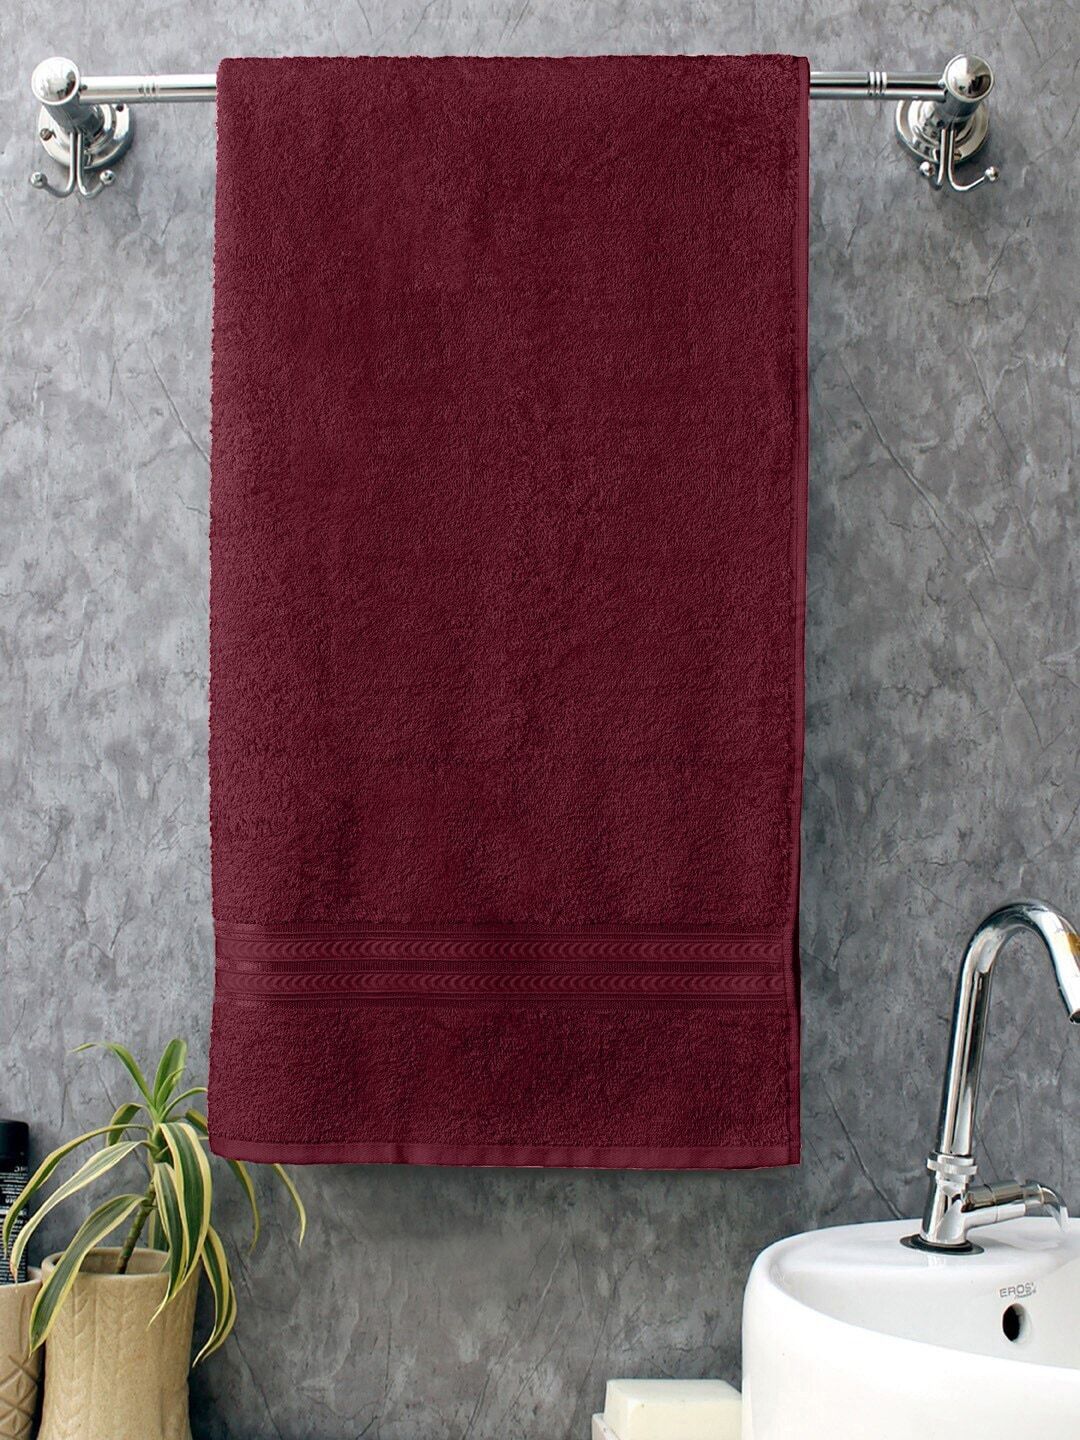 Home Fresh Marron Solid Pure Cotton 400 GSM Bath Towel Price in India